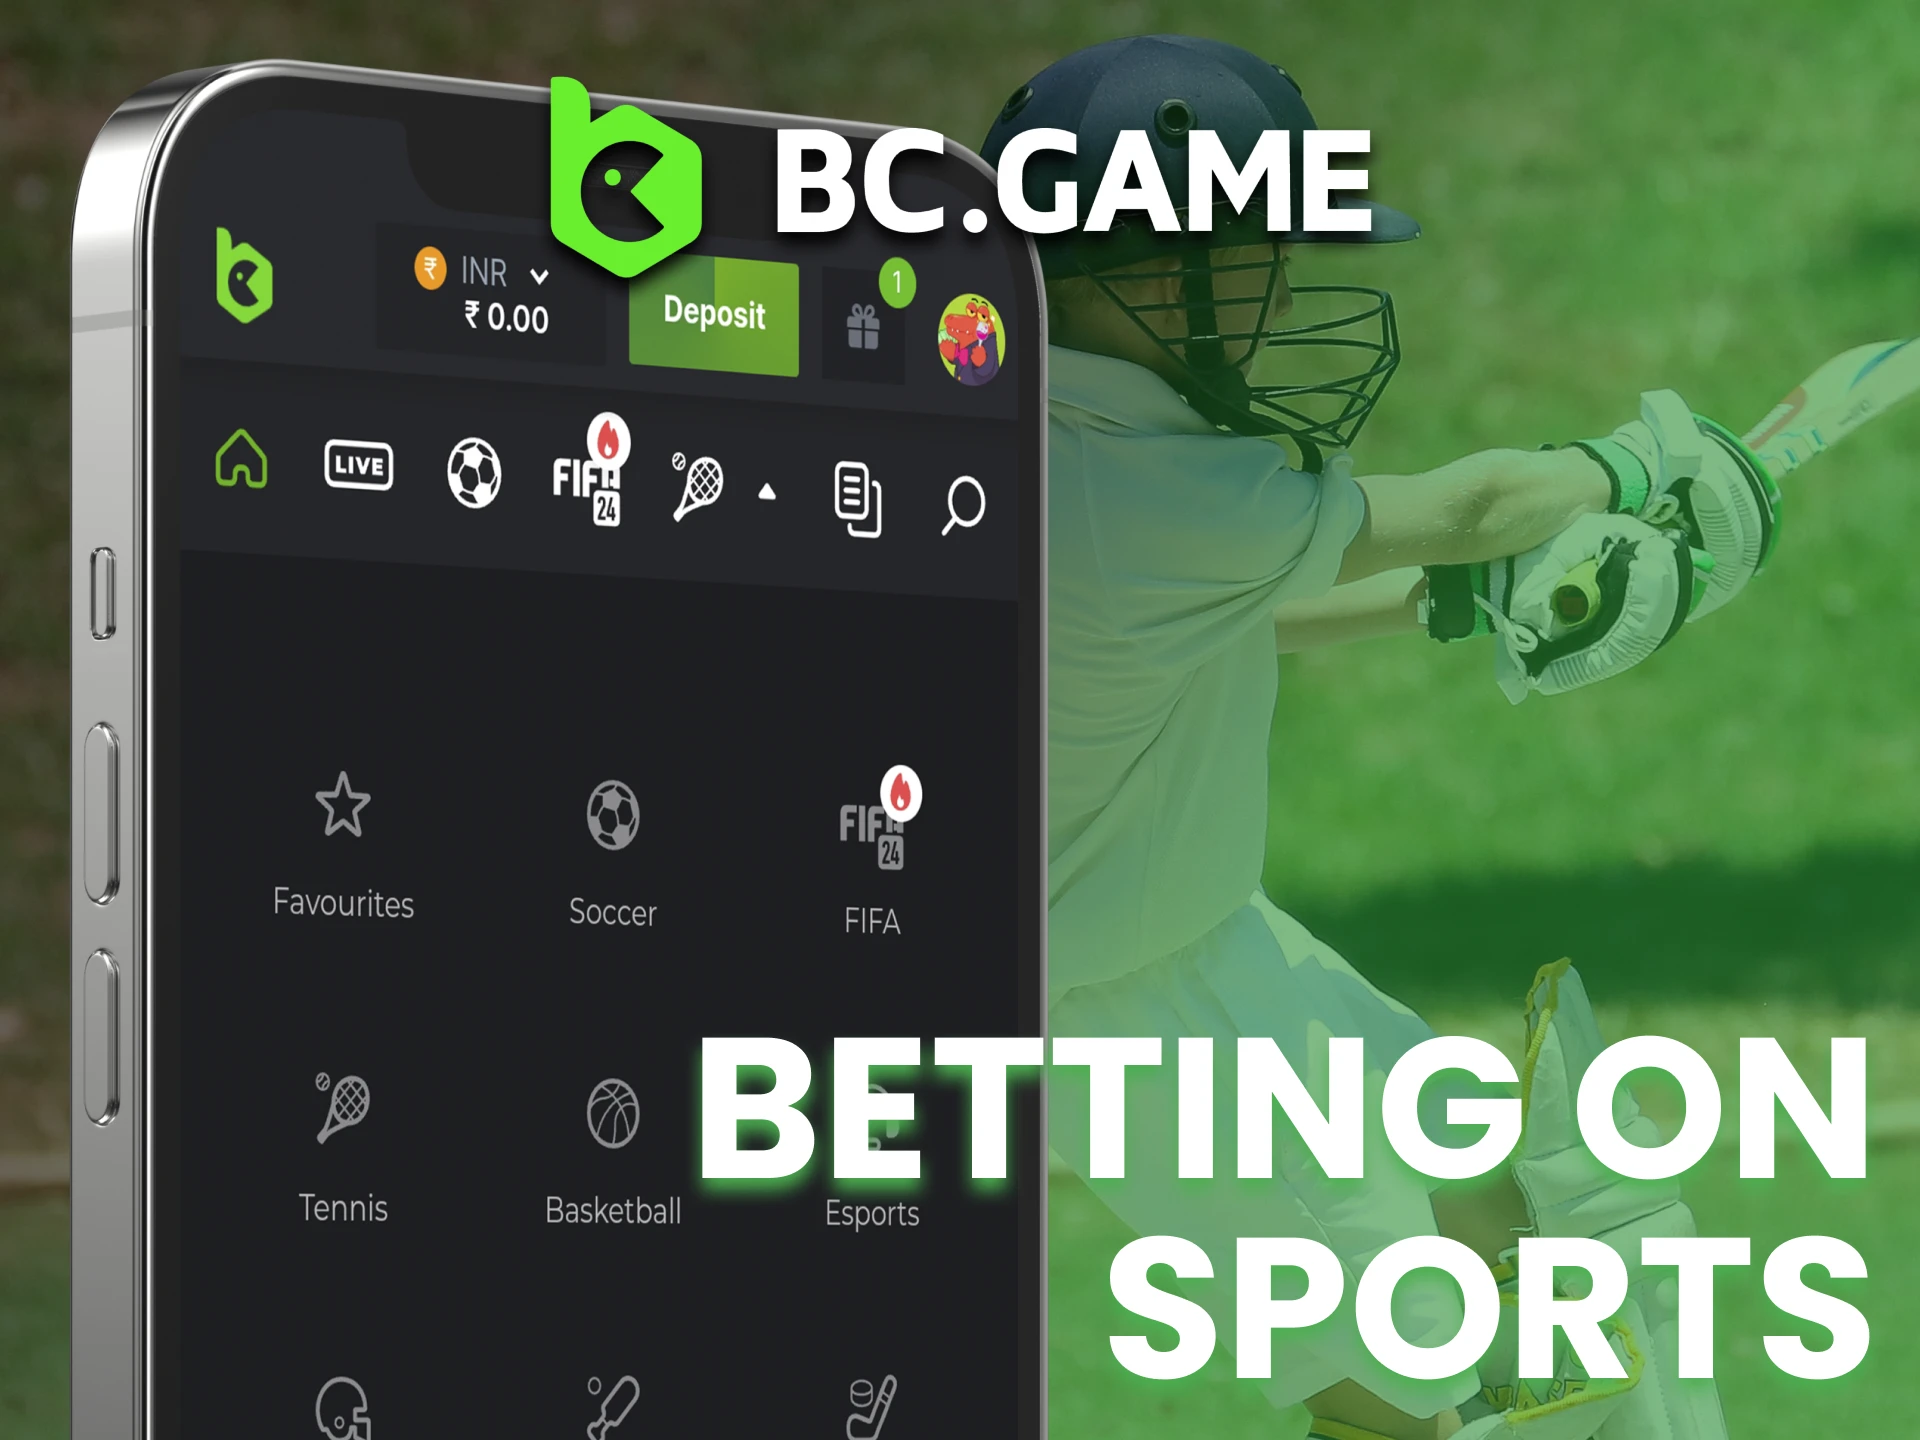 Visit BC Game sports page and make first bet.